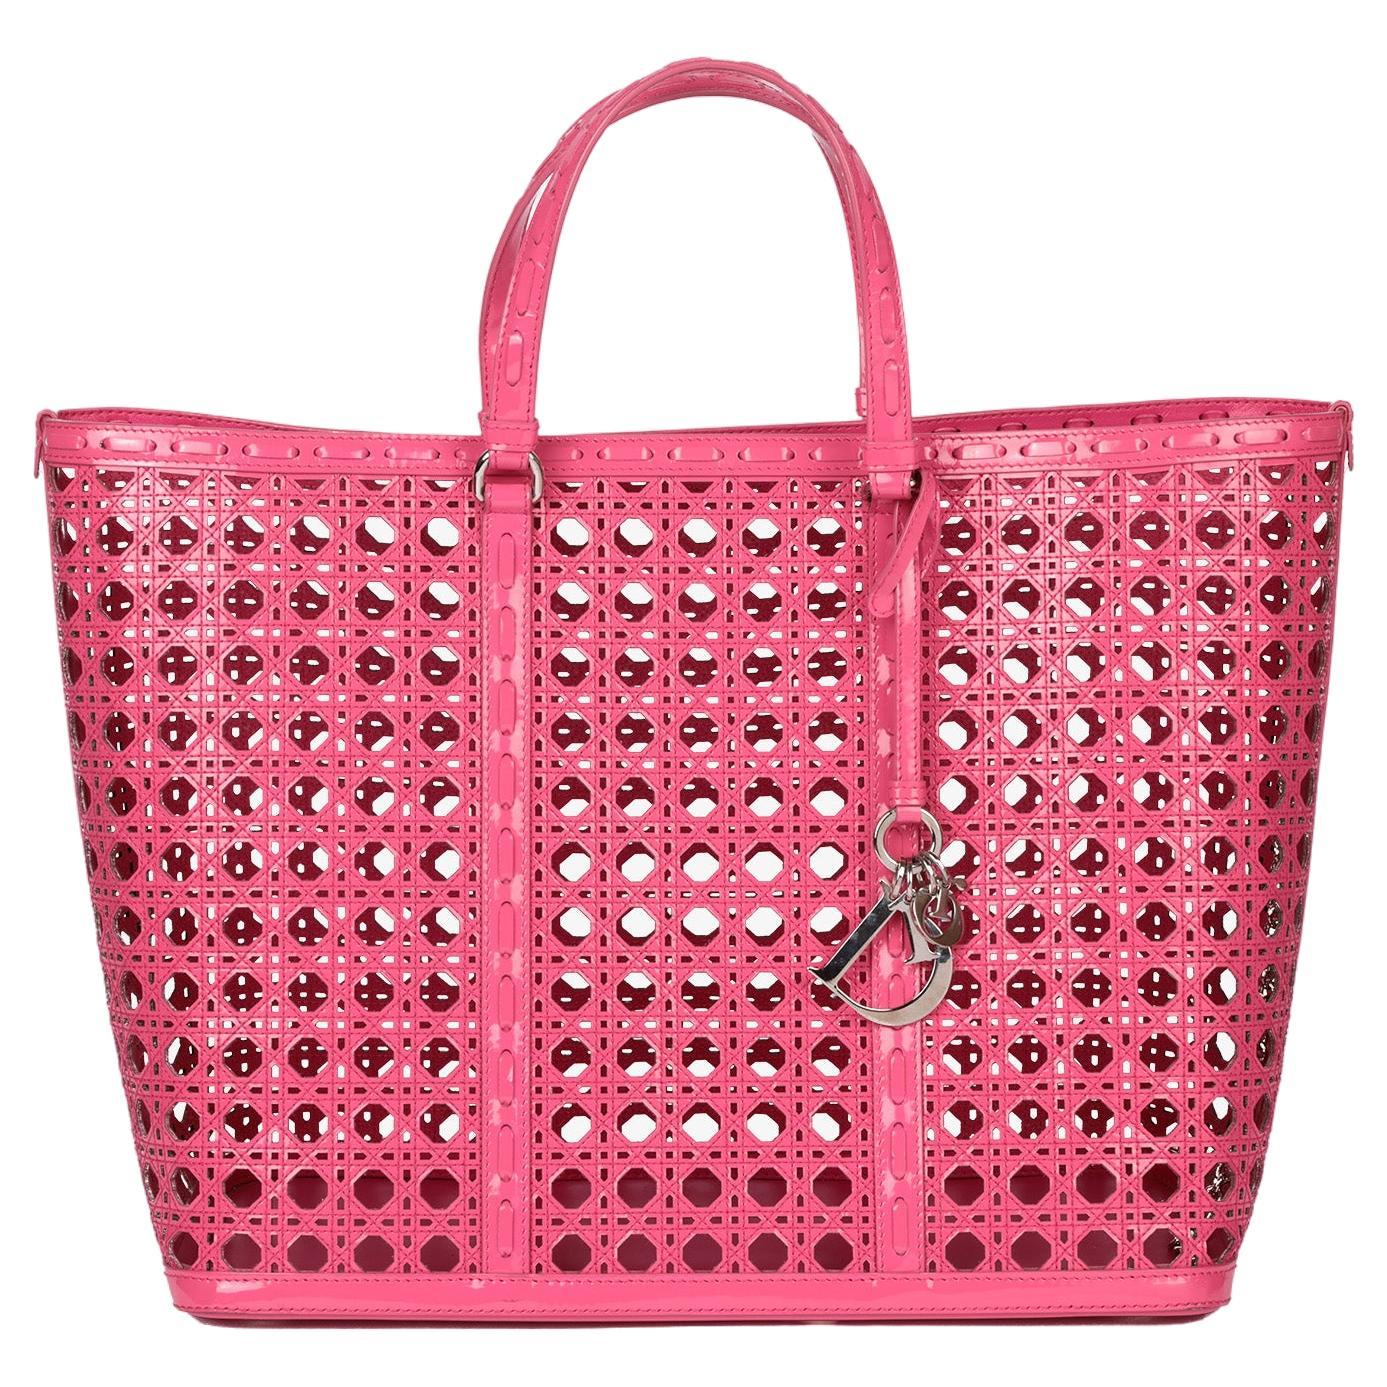 Christian Dior Pink Perforated Patent Leather Tote Bag For Sale